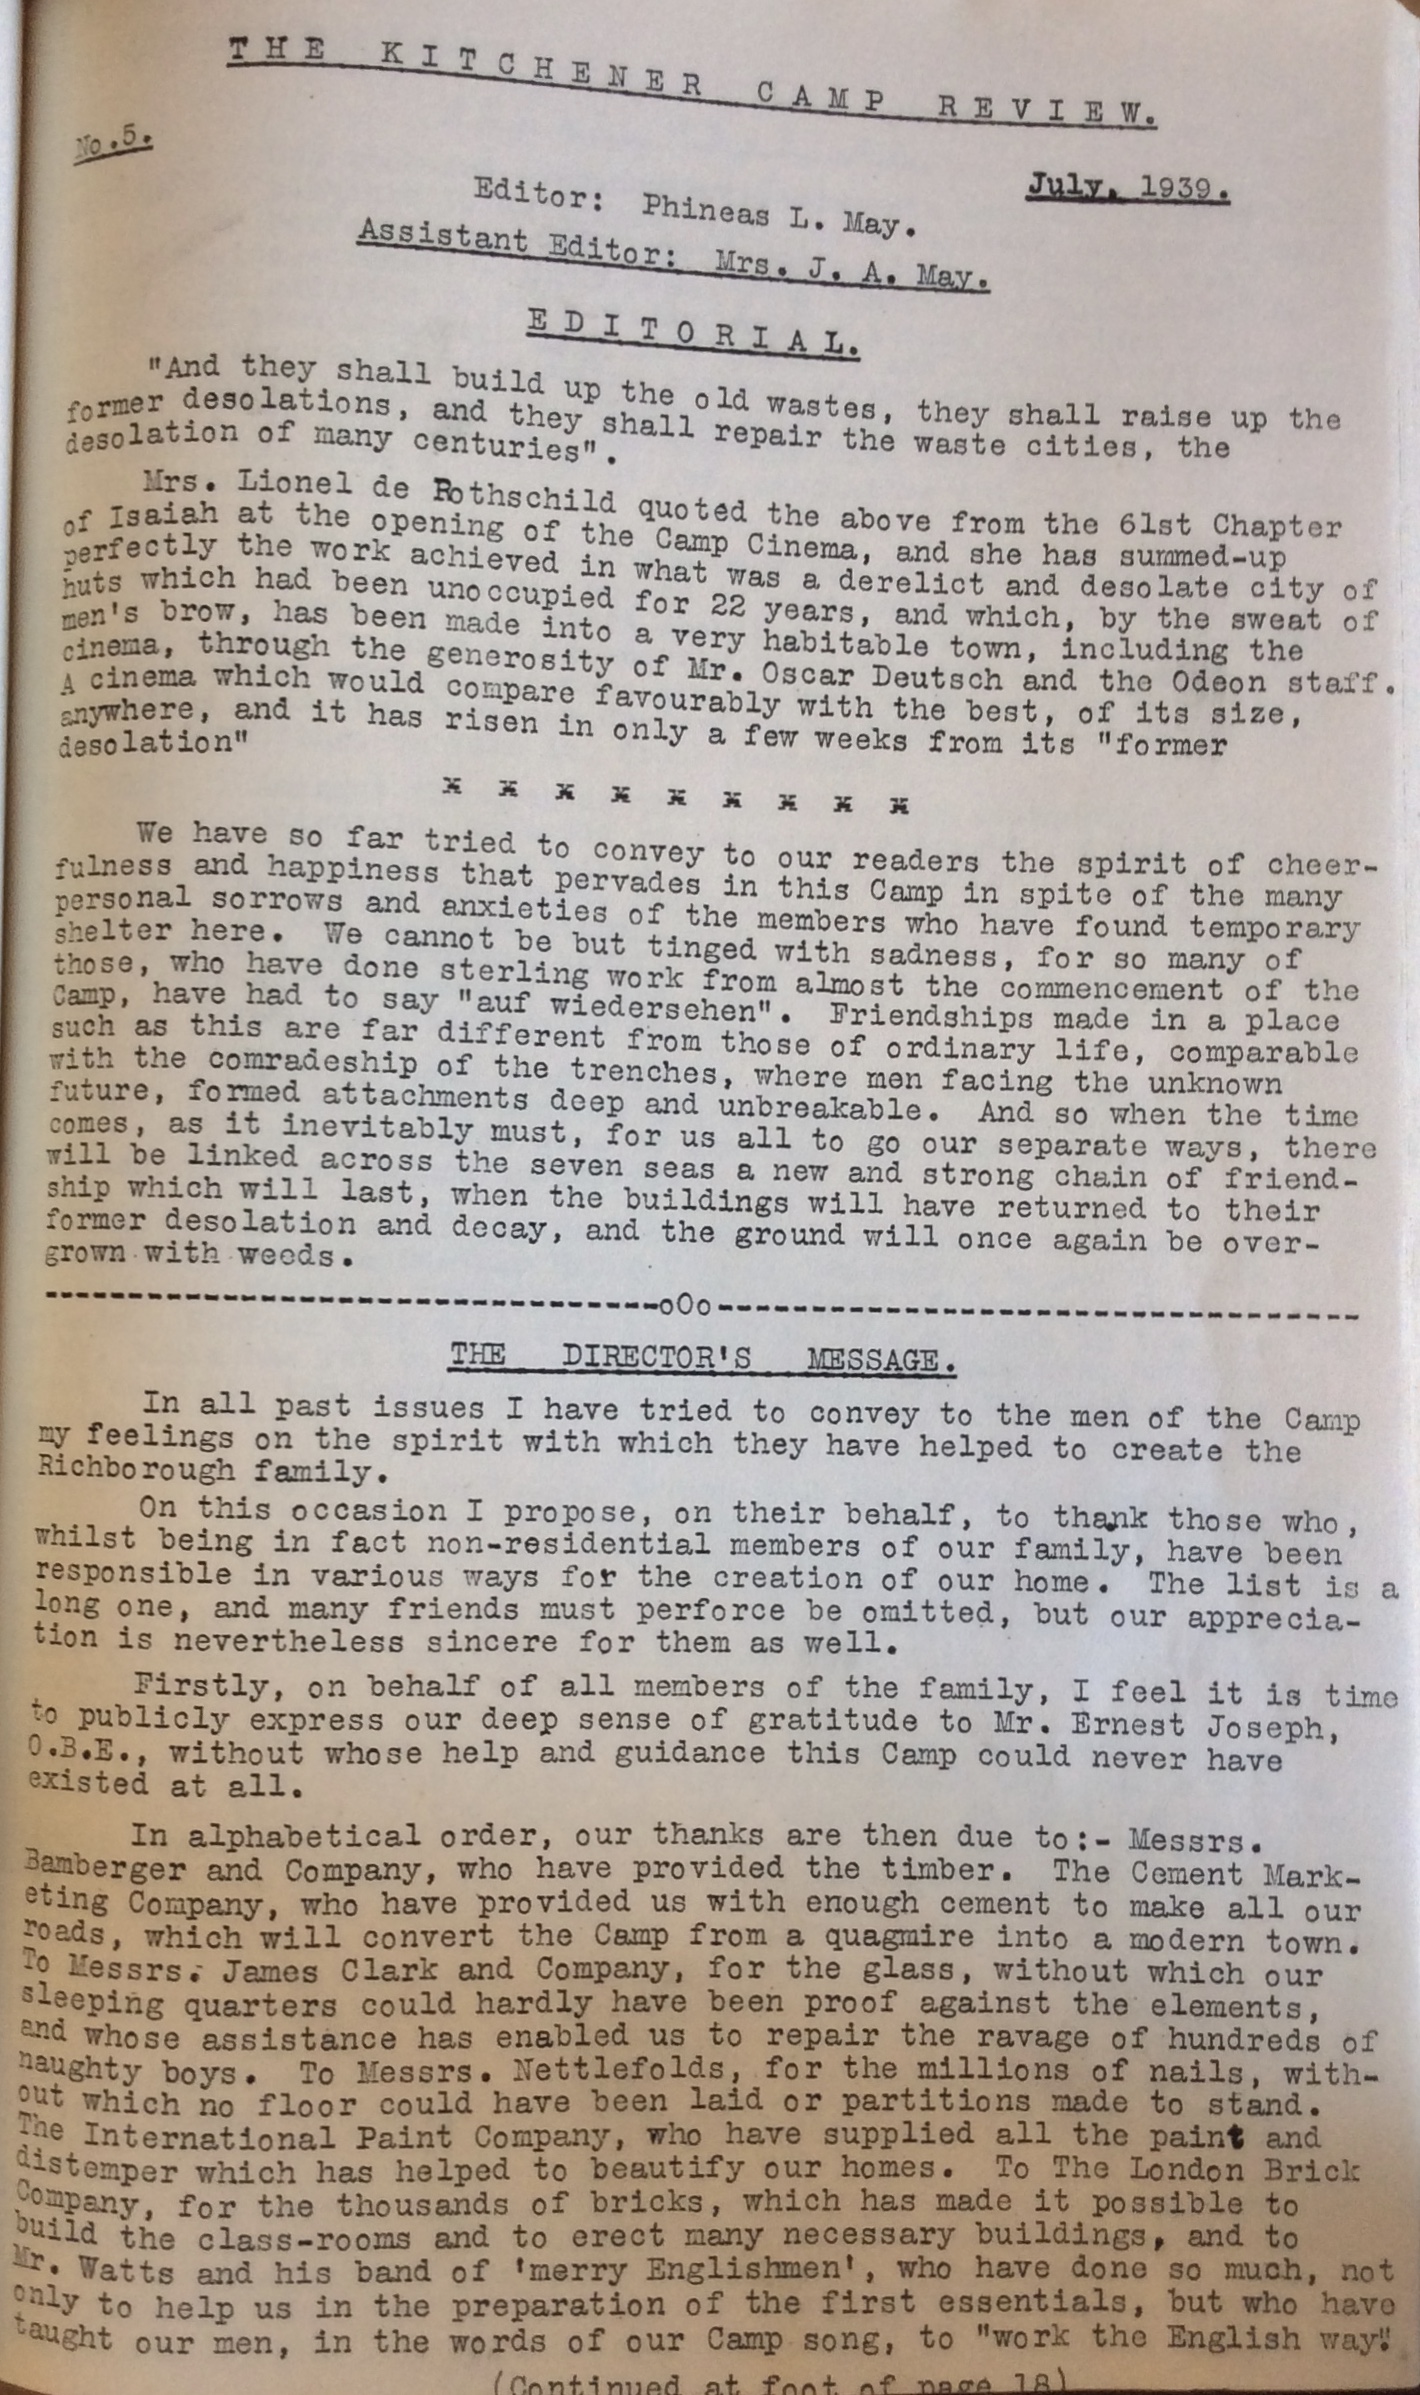 The Kitchener Camp Review, July 1939, No. 5, page 1